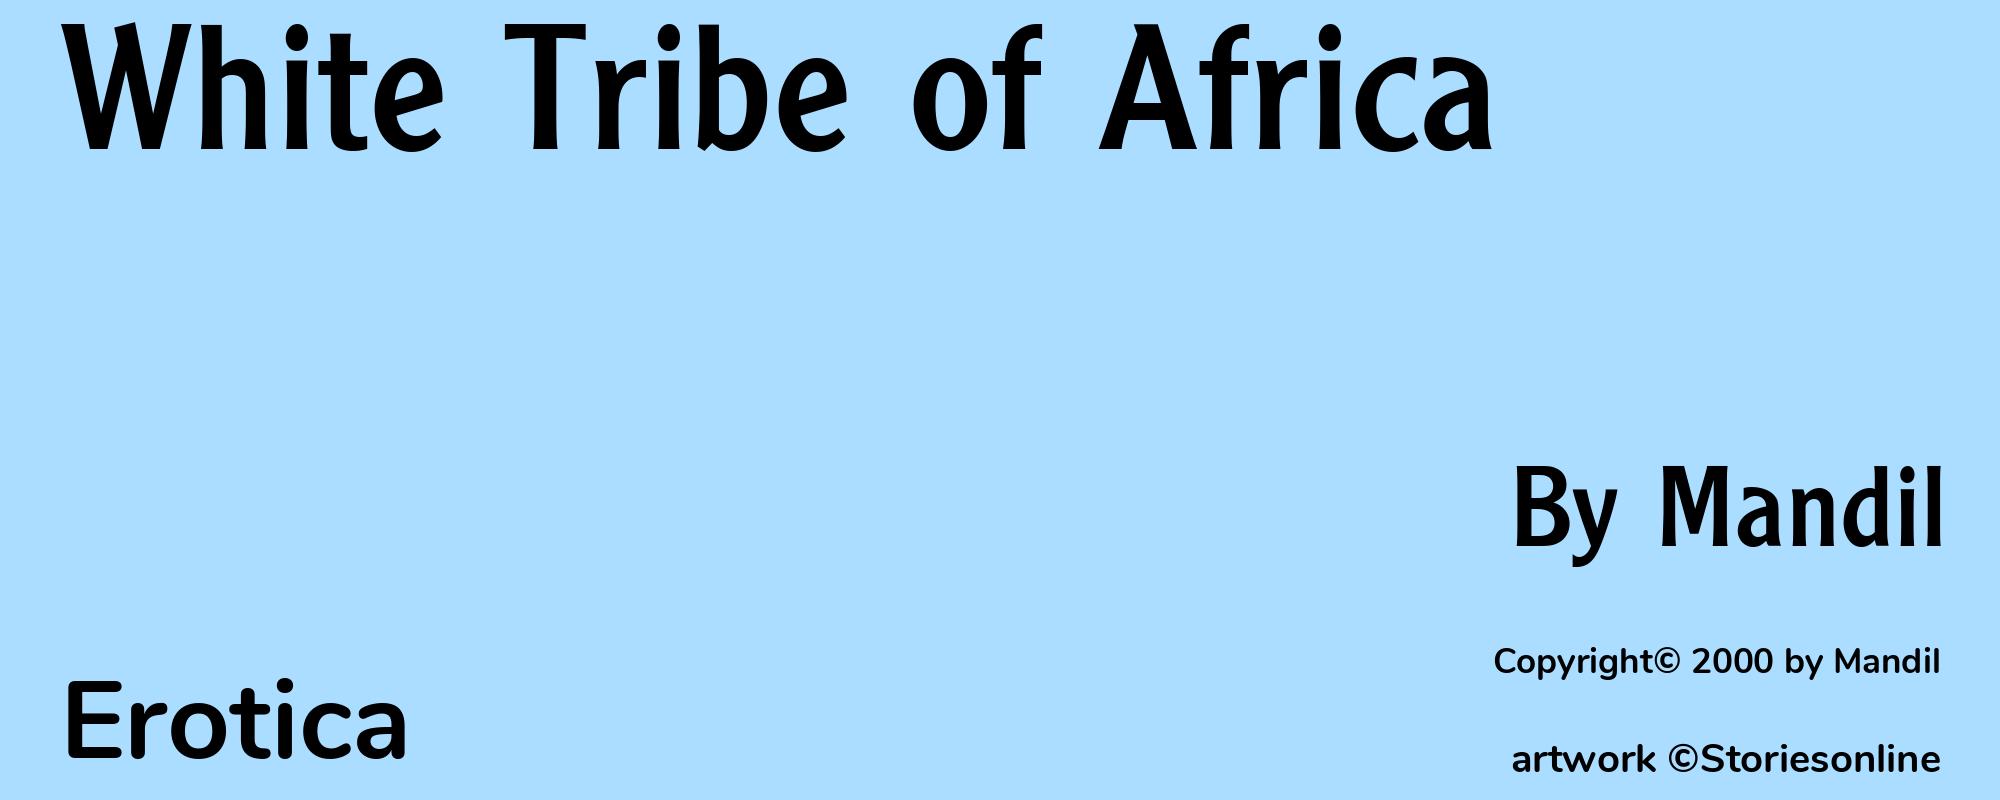 White Tribe of Africa - Cover